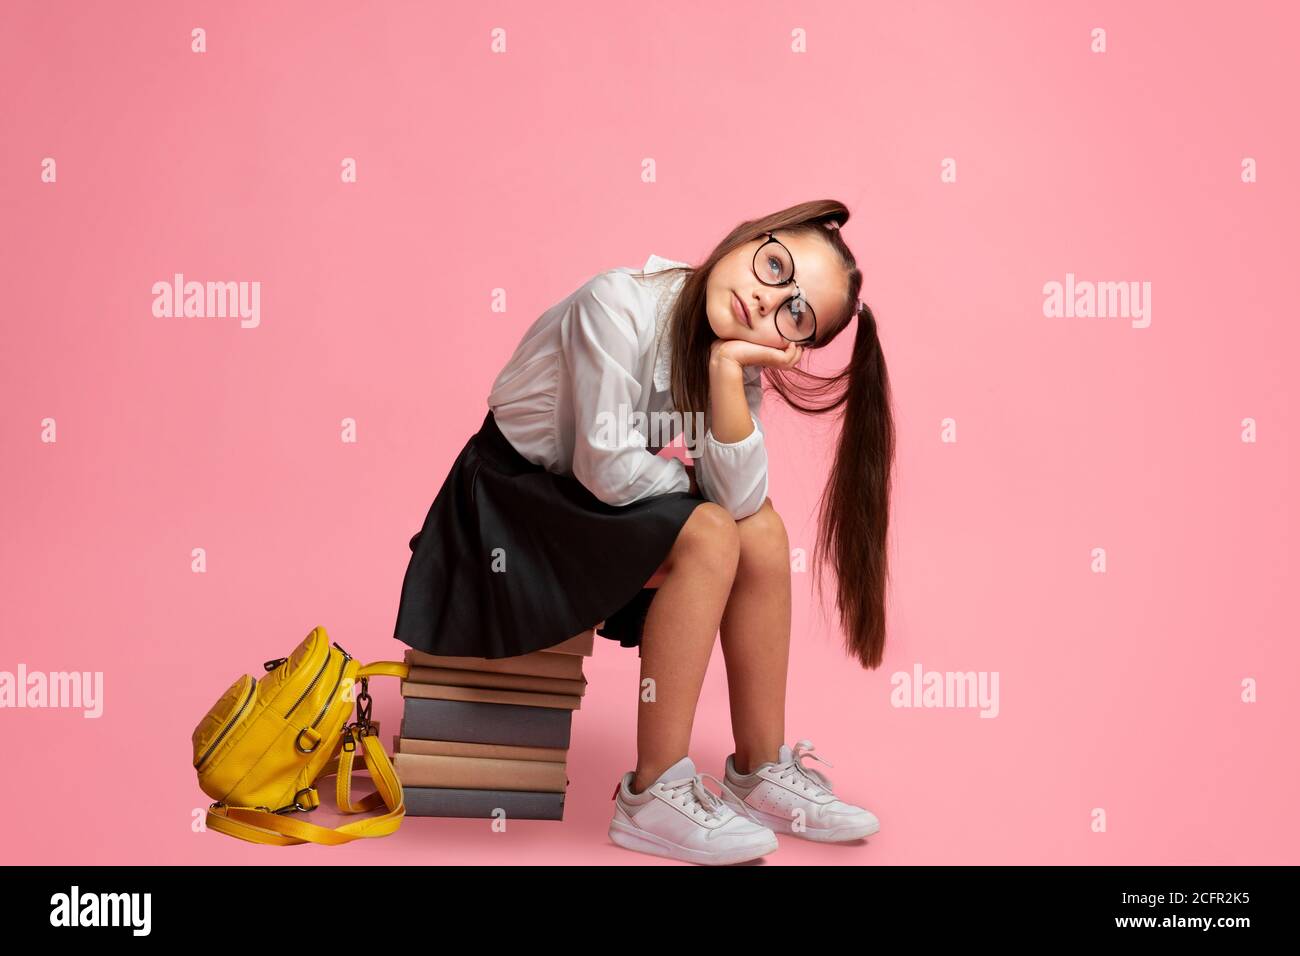 Schoolgirl in glasses with ponytails and backpack sits on stack of books and looks at empty space Stock Photo